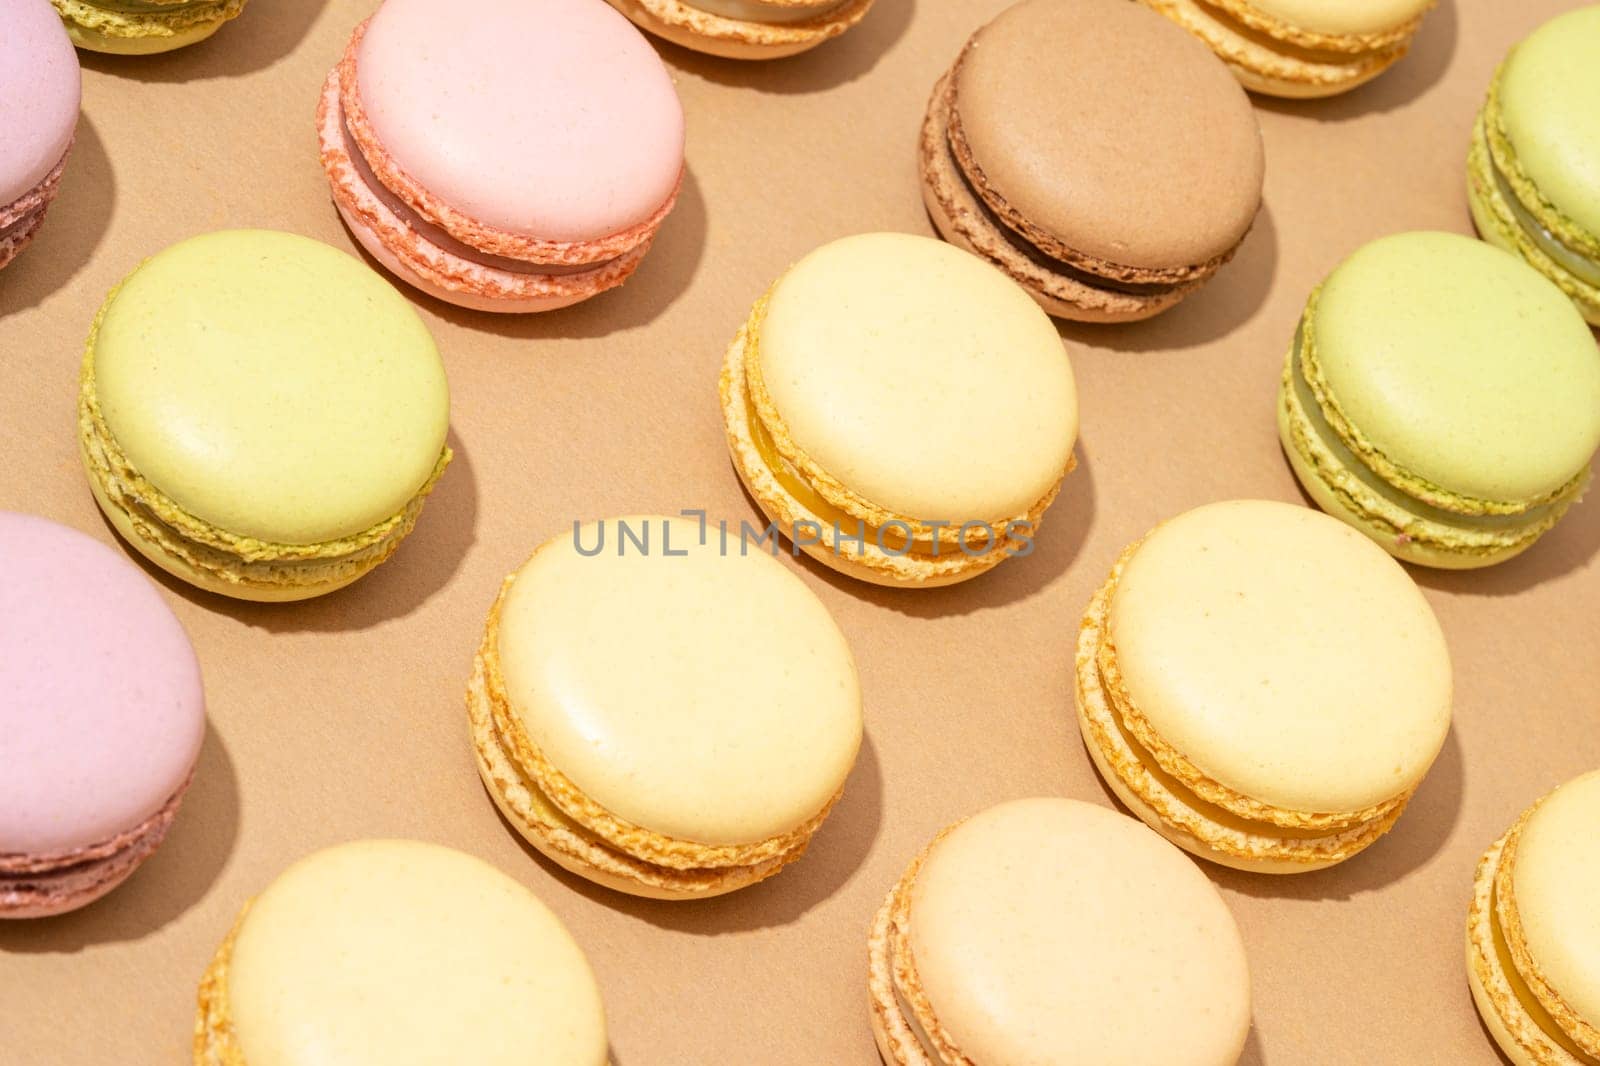 An overhead shot of a beige table surface featuring an array of colorful macarons in neat rows by A_Karim